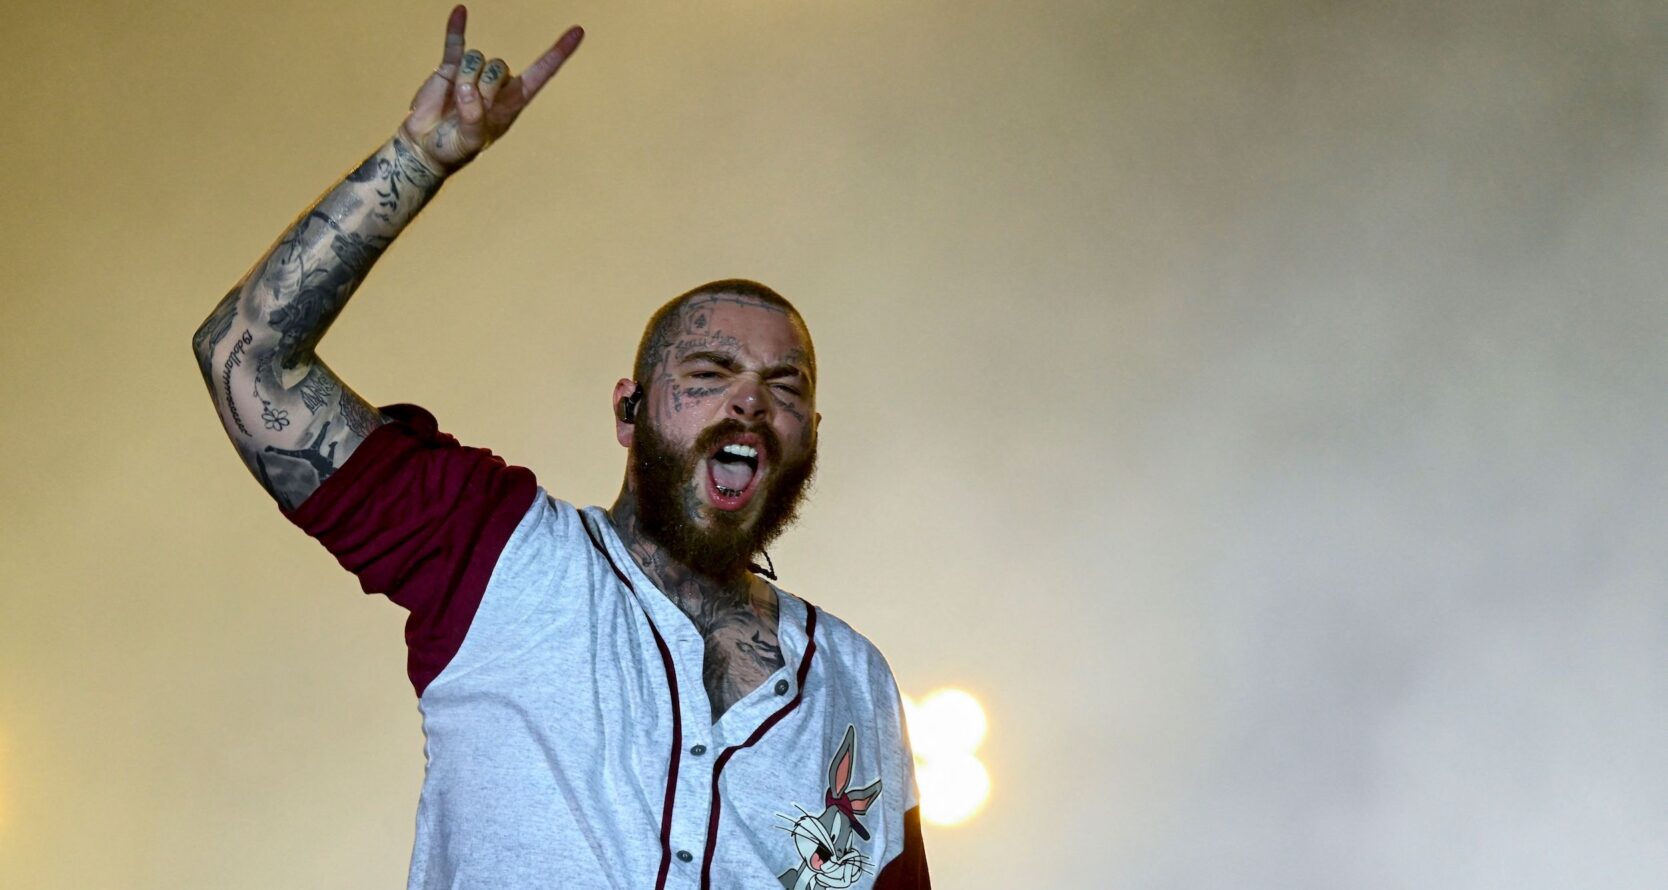 Post Malone Injures Ribs After Falling on Stage, Finishes Concert